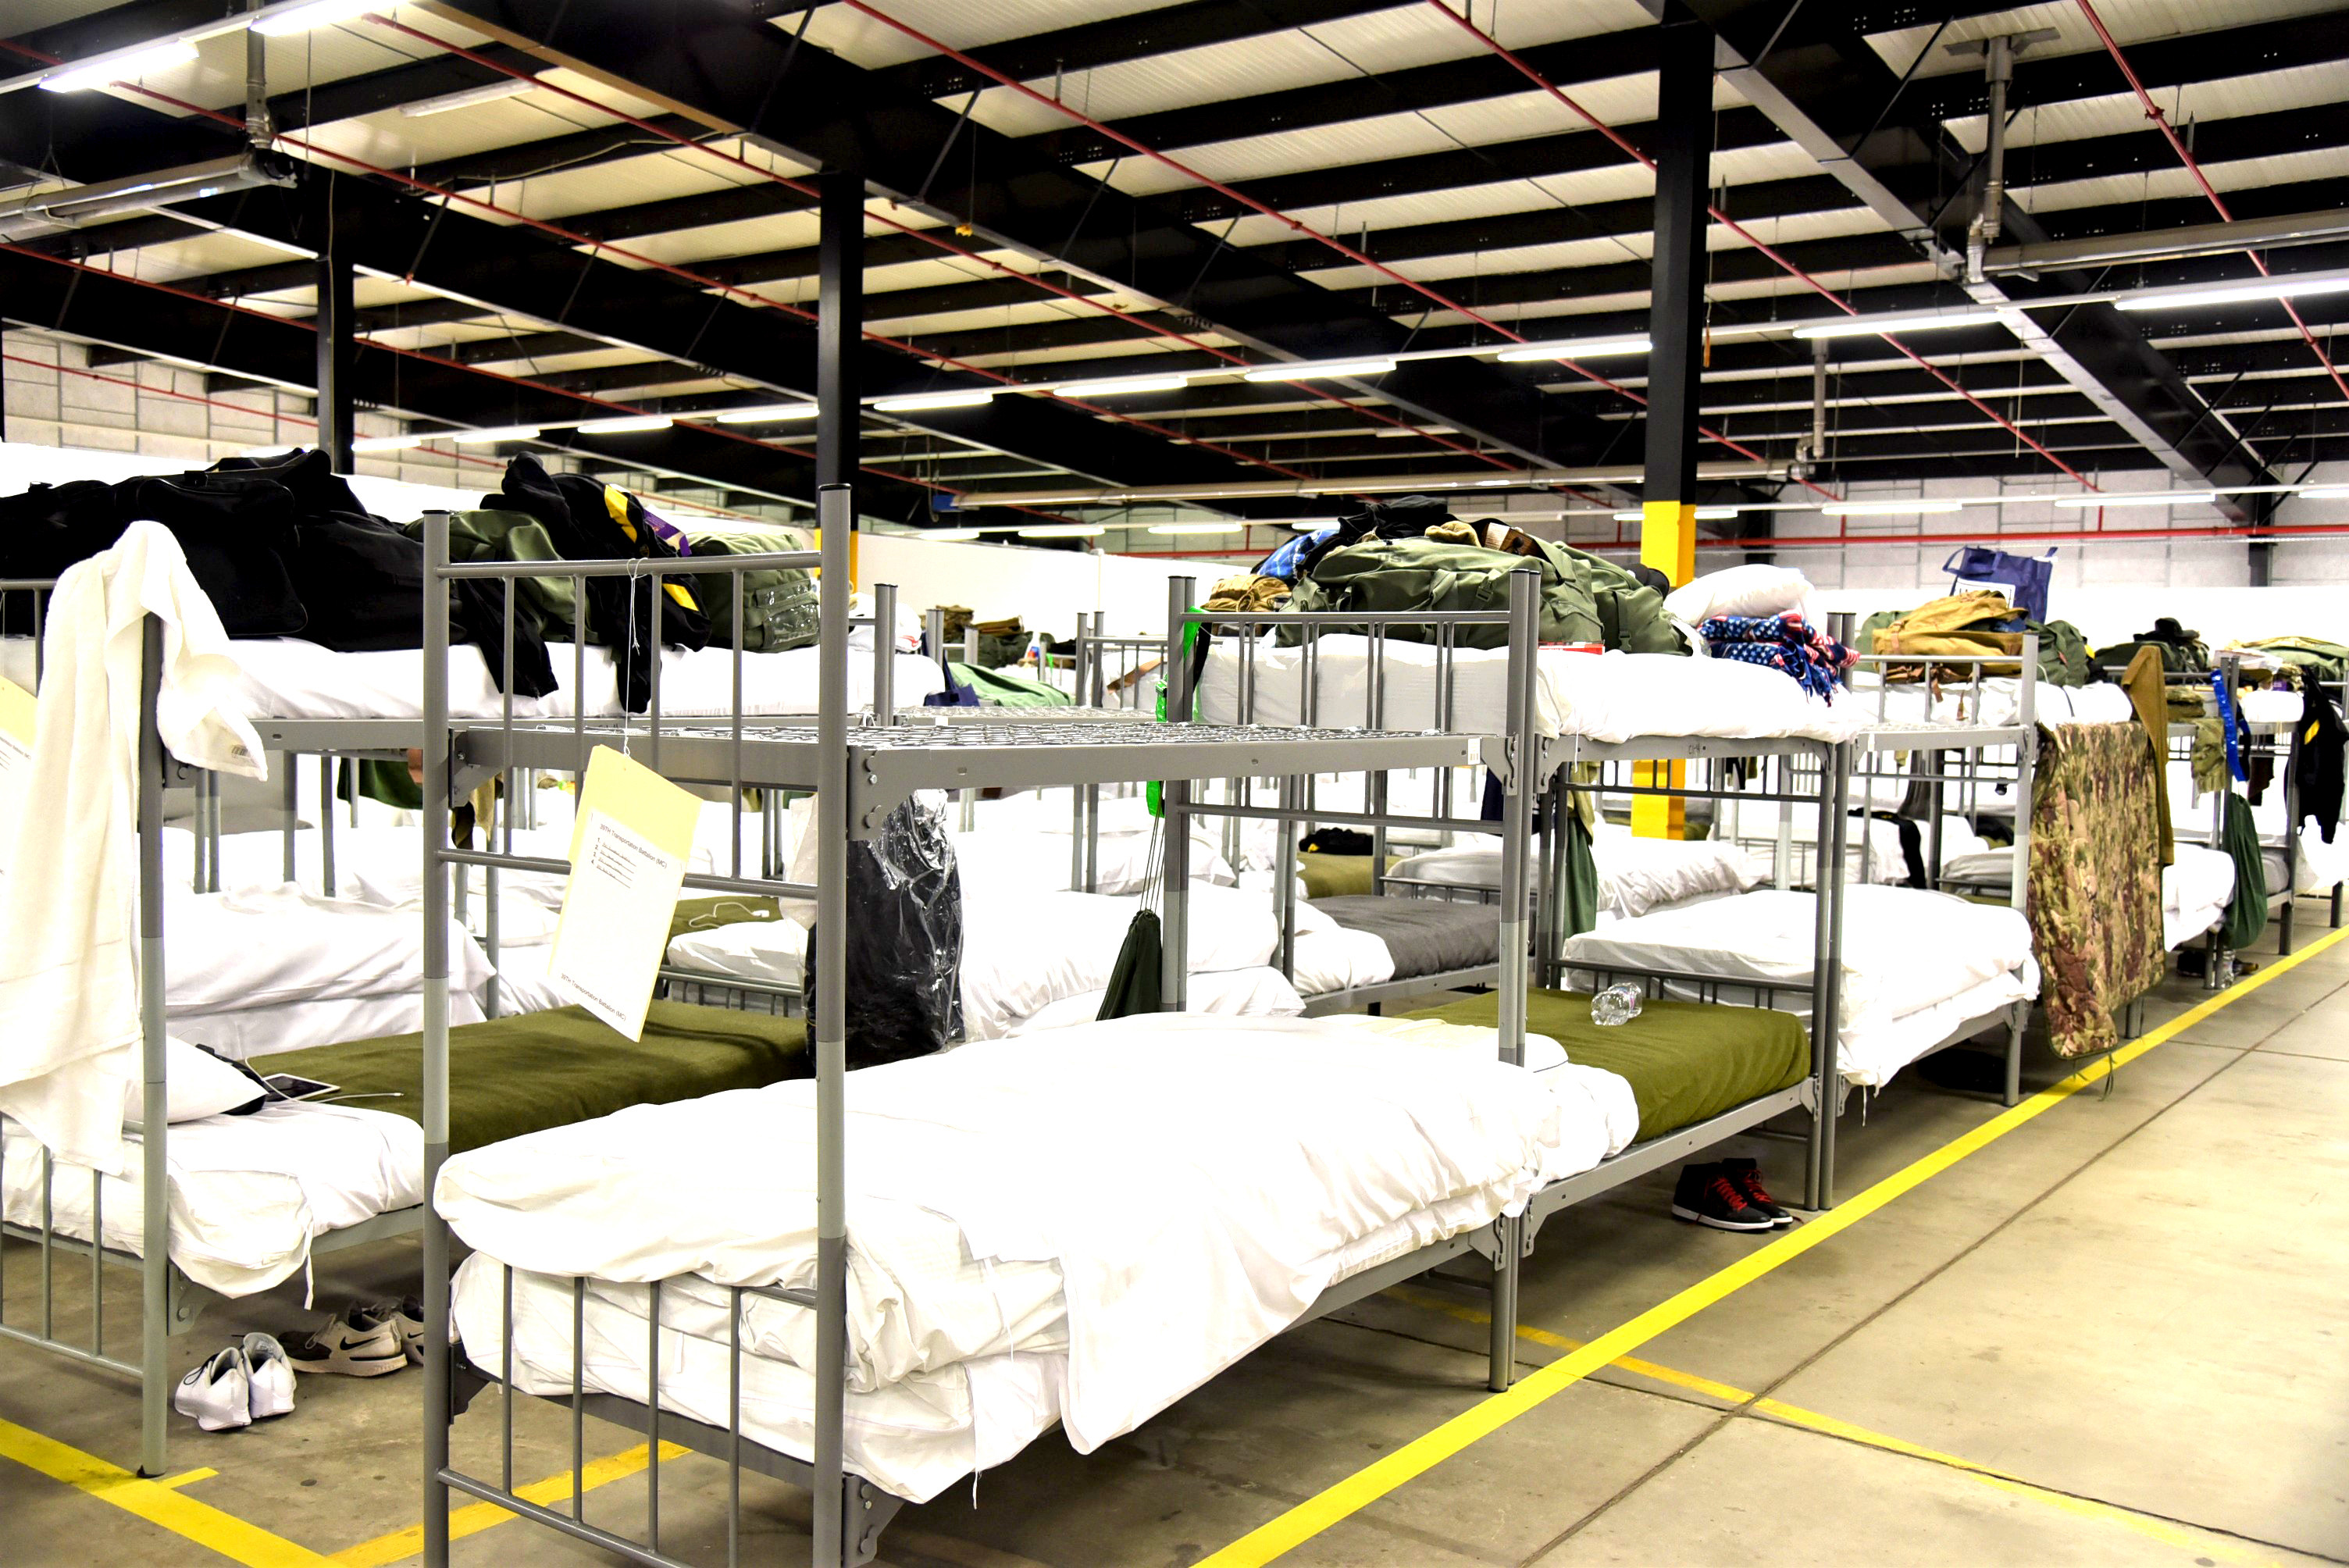 Army Bunks, Military Style Bunk Beds